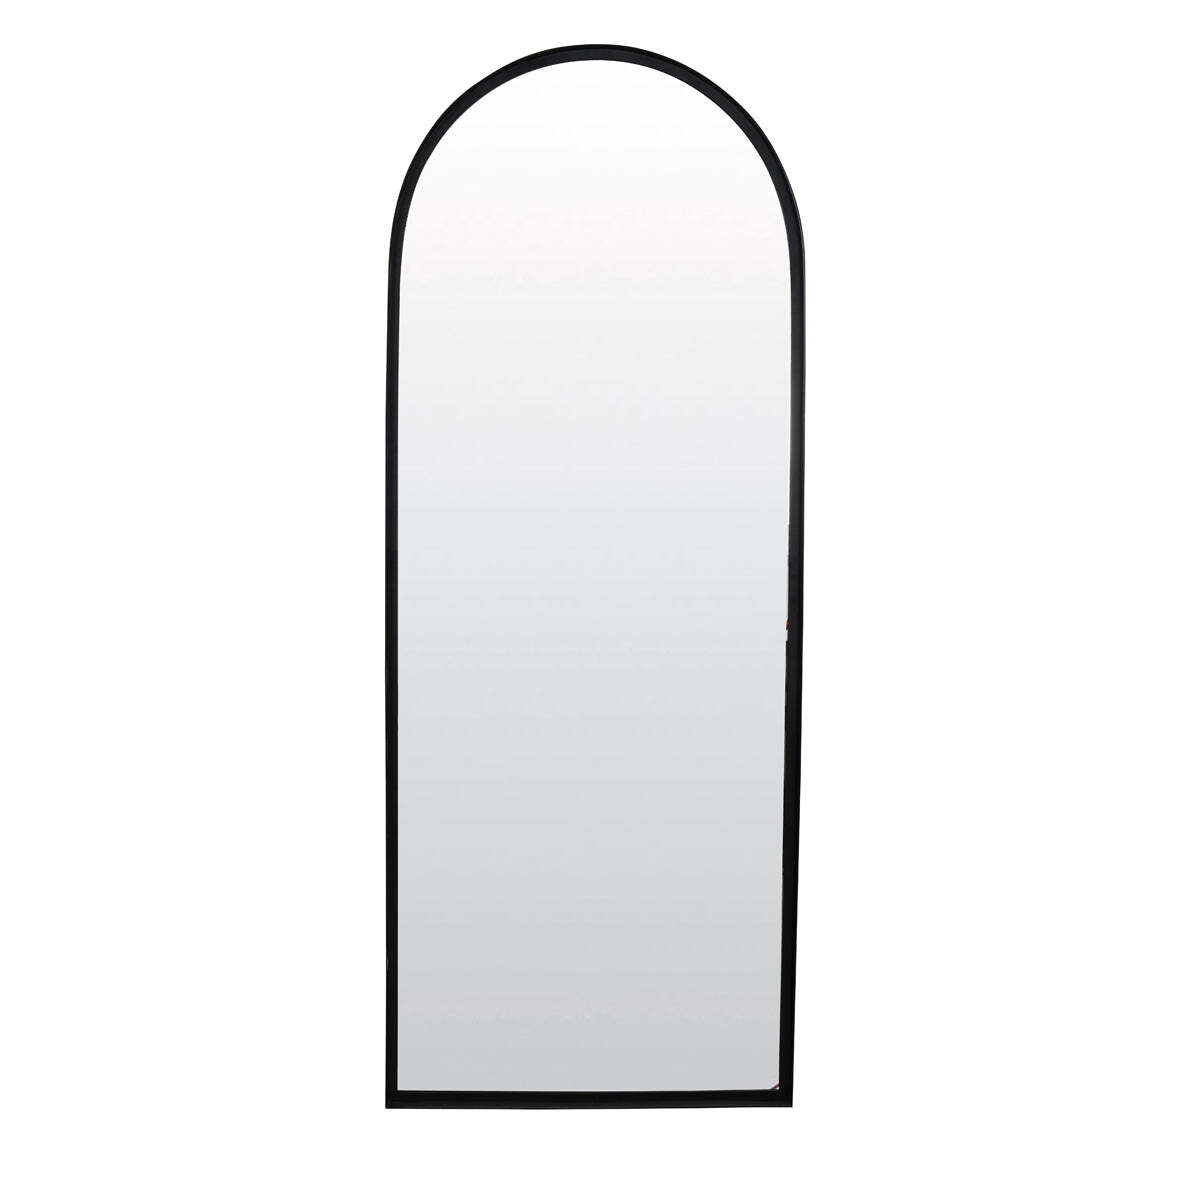 Firenze Tall Arched Metal Framed Mirror - Black